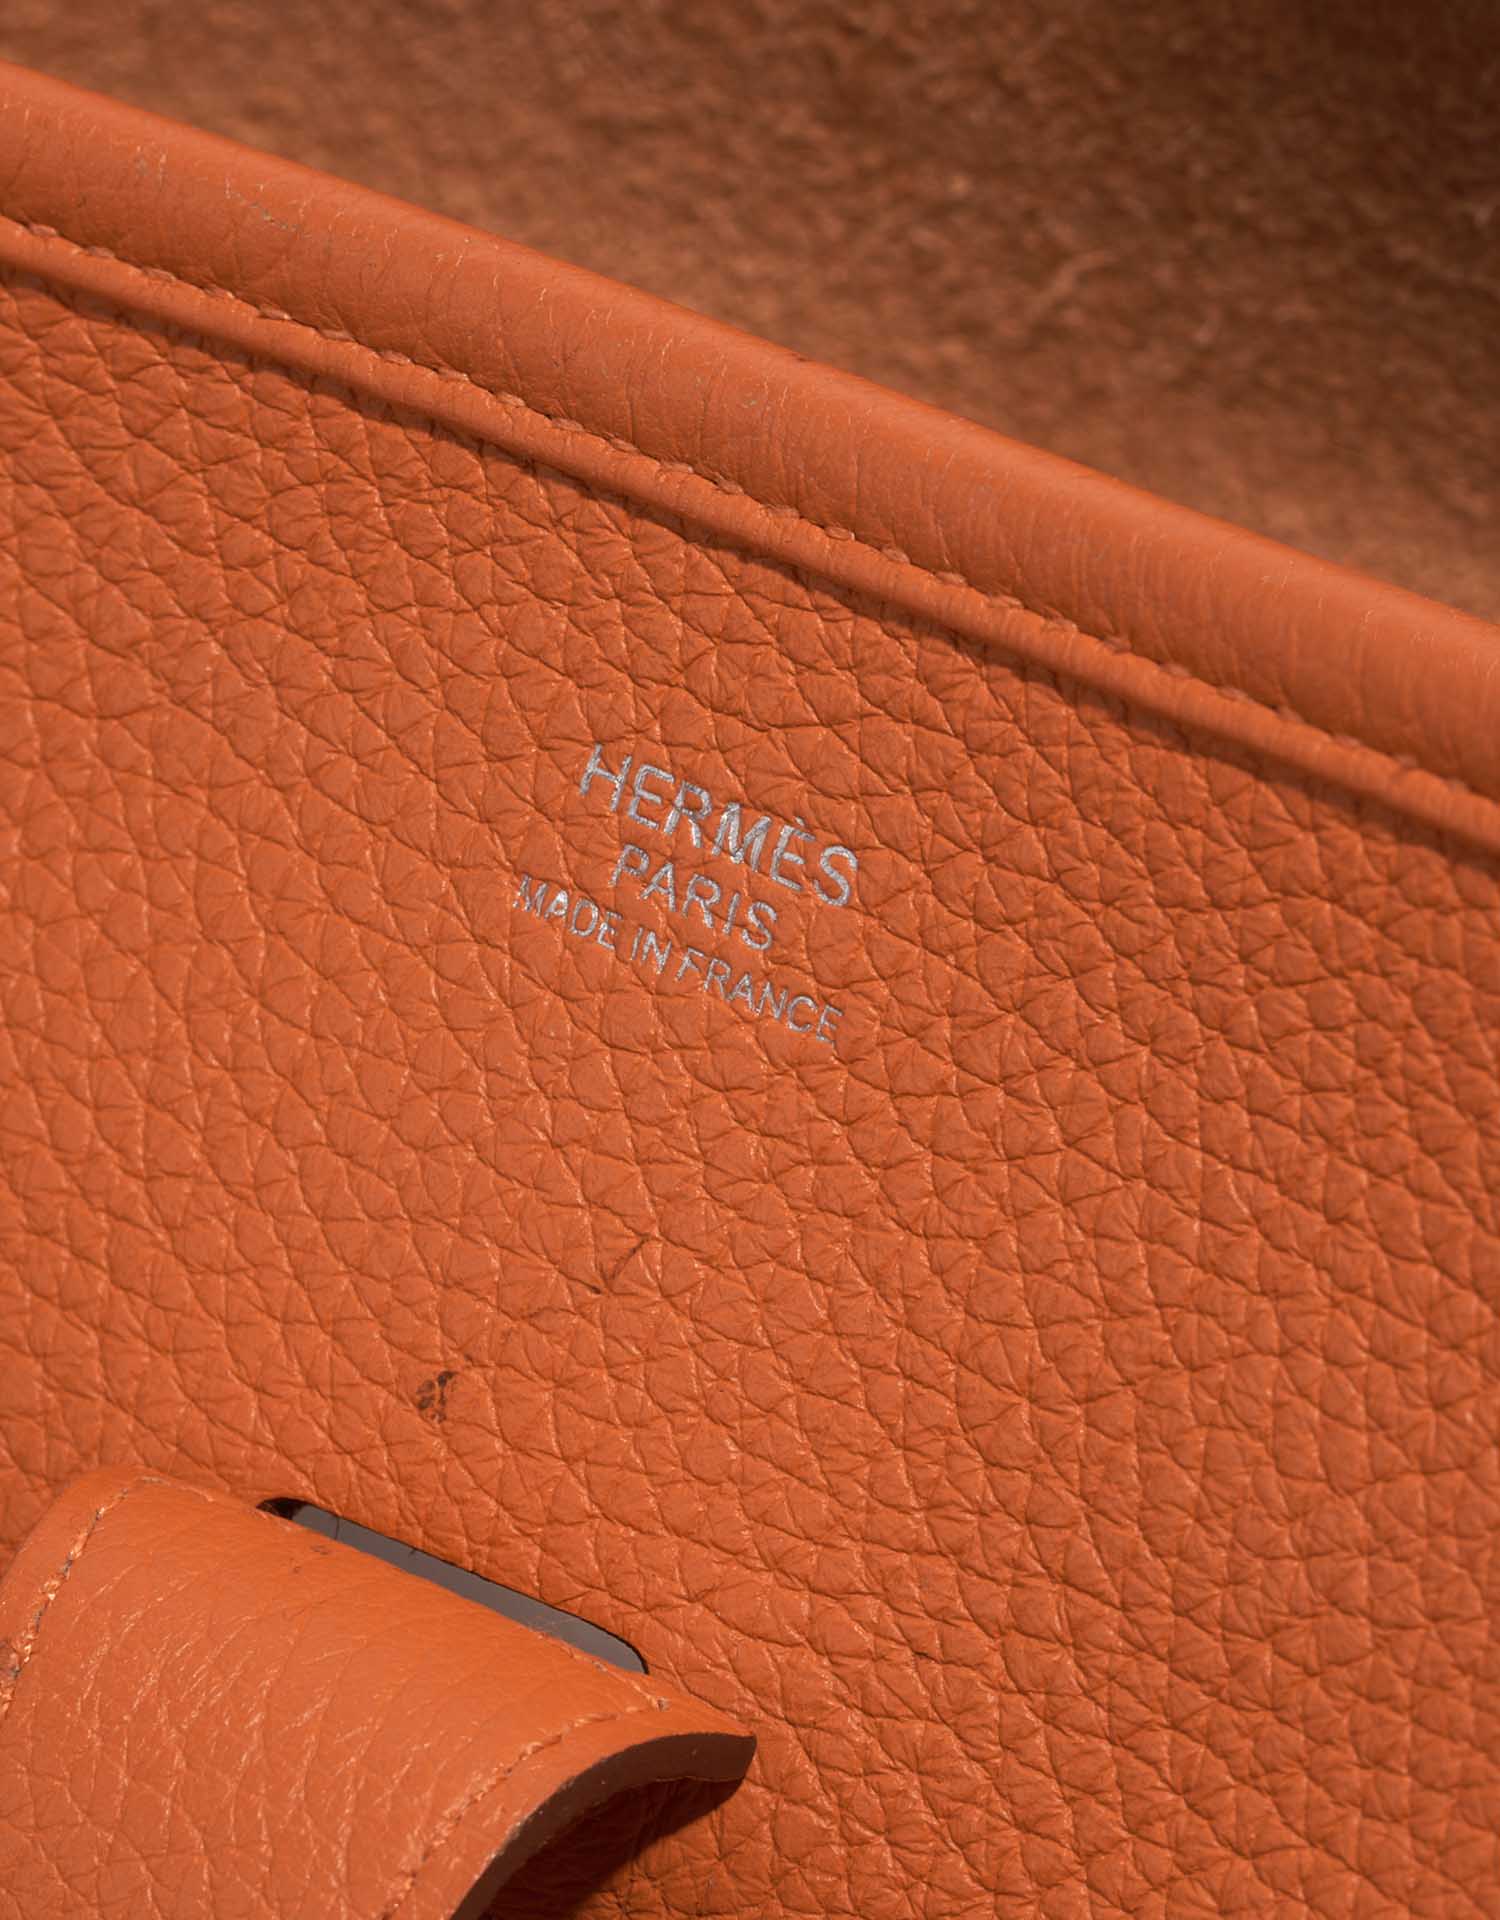 Hermès Evelyne Iii 29 In Orange H Taurillon Clemence With